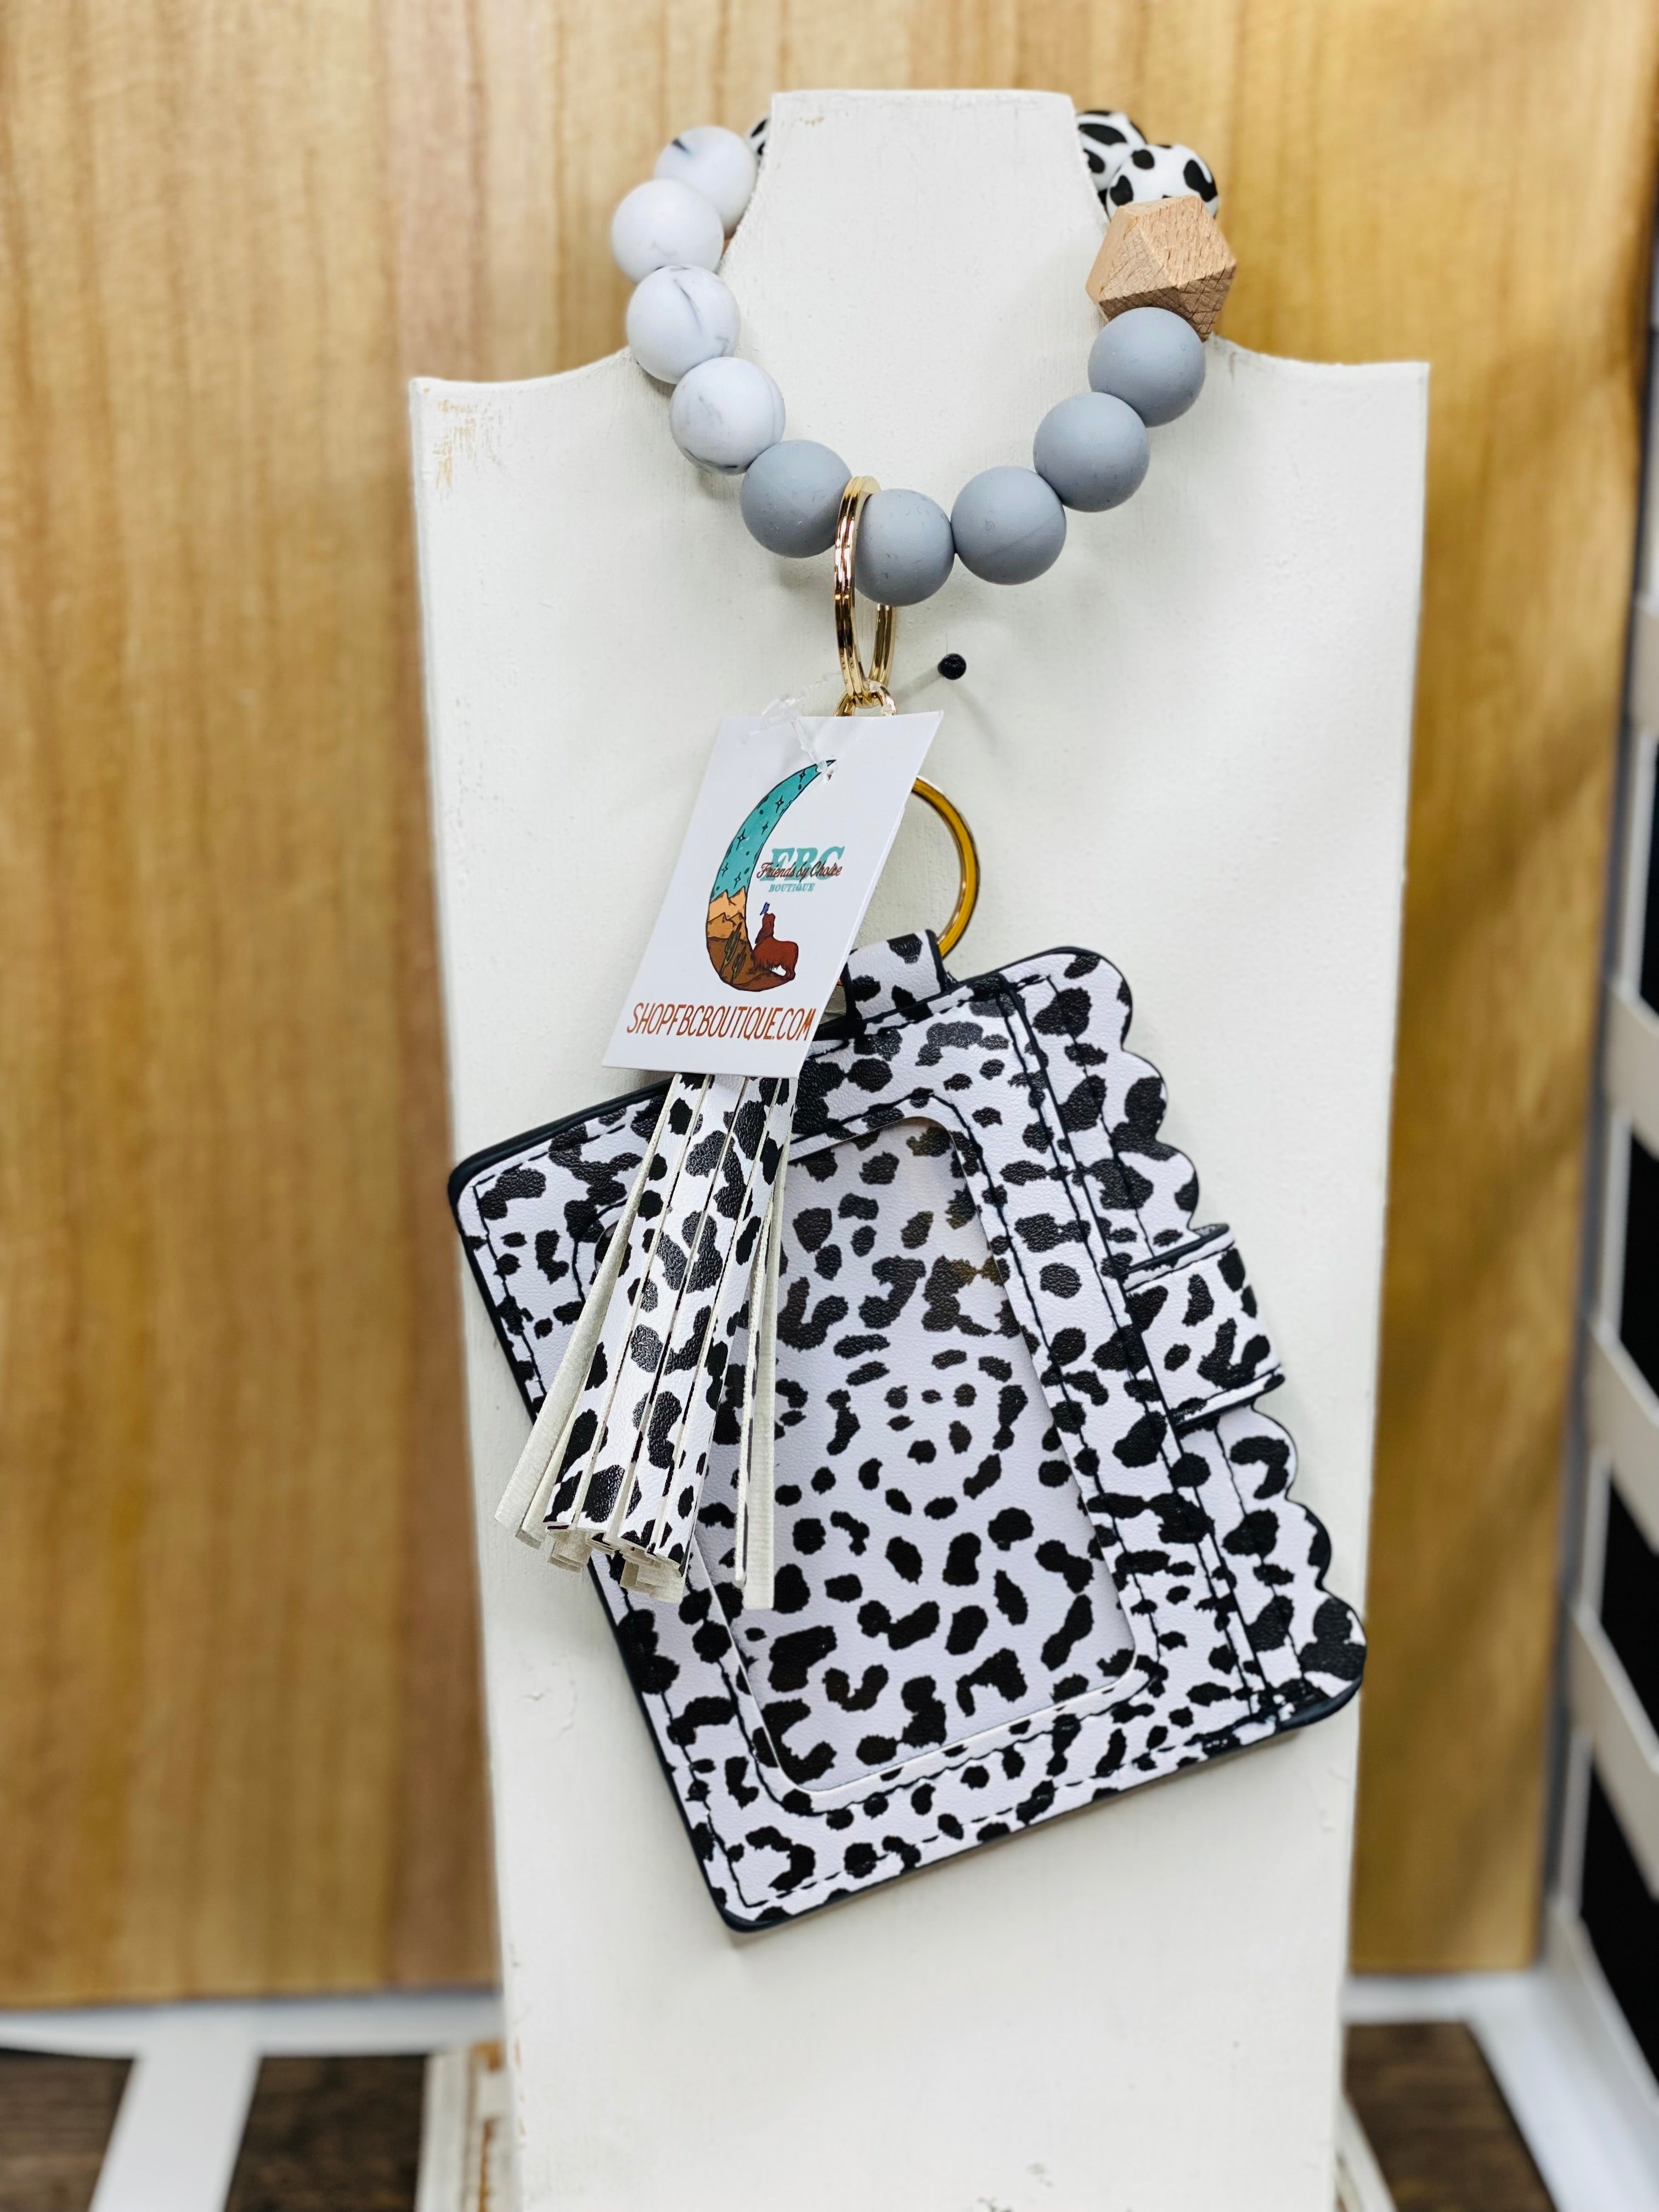 Holding It Together Cow Print Wristlet Wallet Tassel Combo